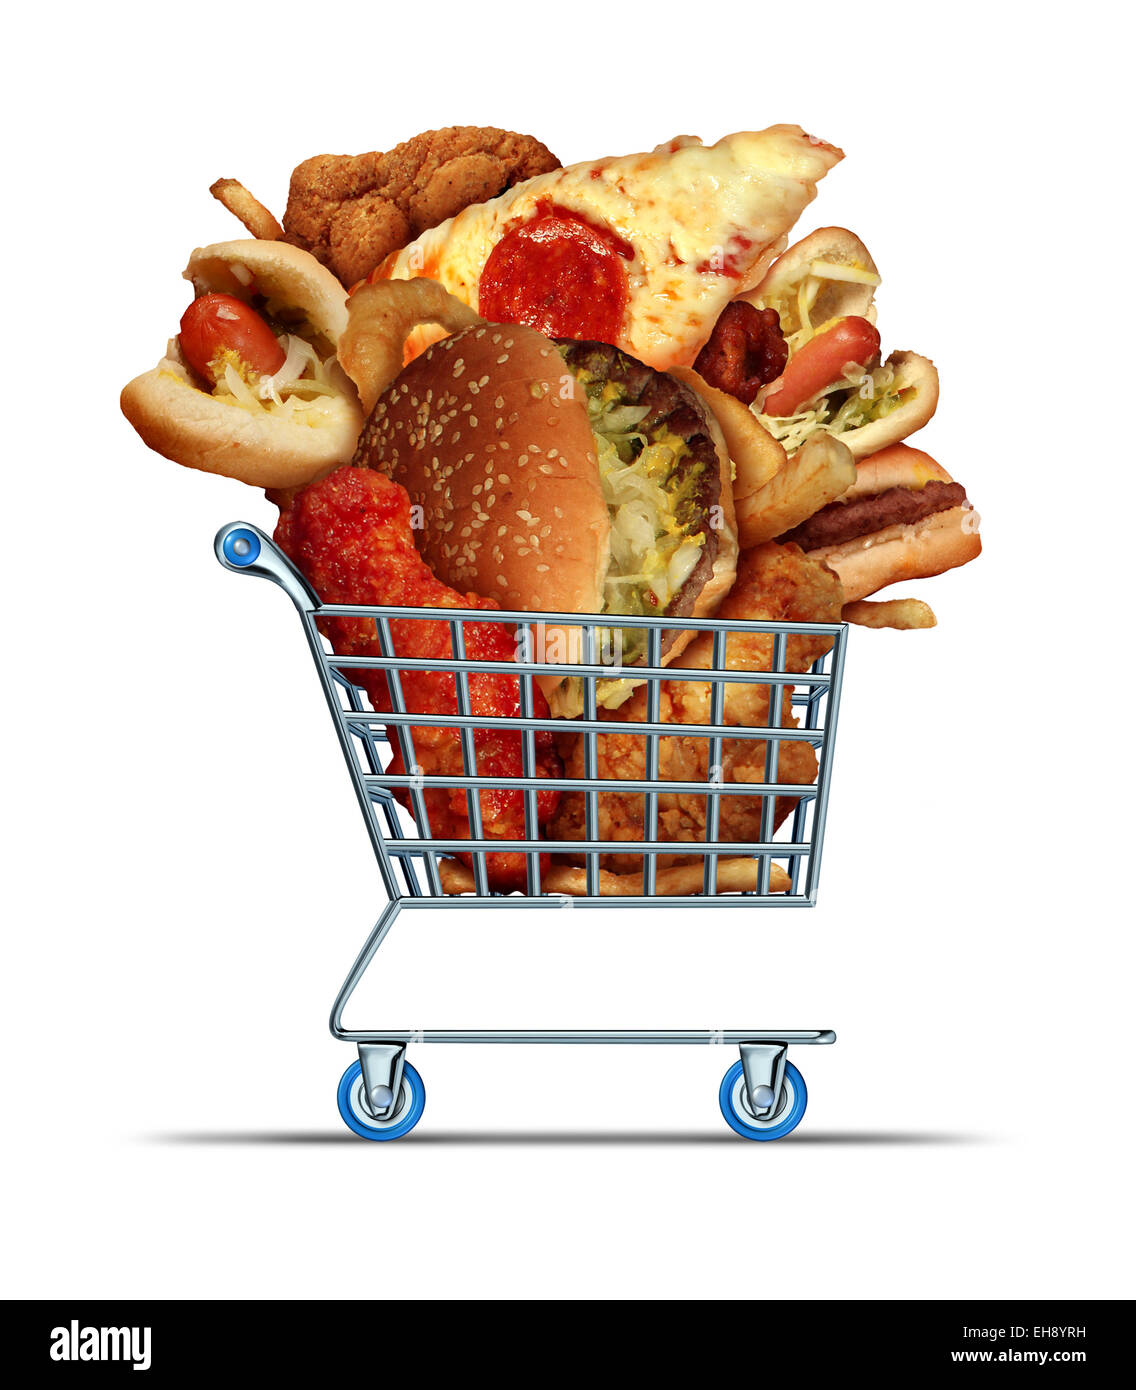 Unhealthy food shopping as a diet concept with greasy fried take out as onion rings burger and hot dogs with fried chicken french fries and pizza in a store shop cart as a symbol of consumer eating habits. Stock Photo